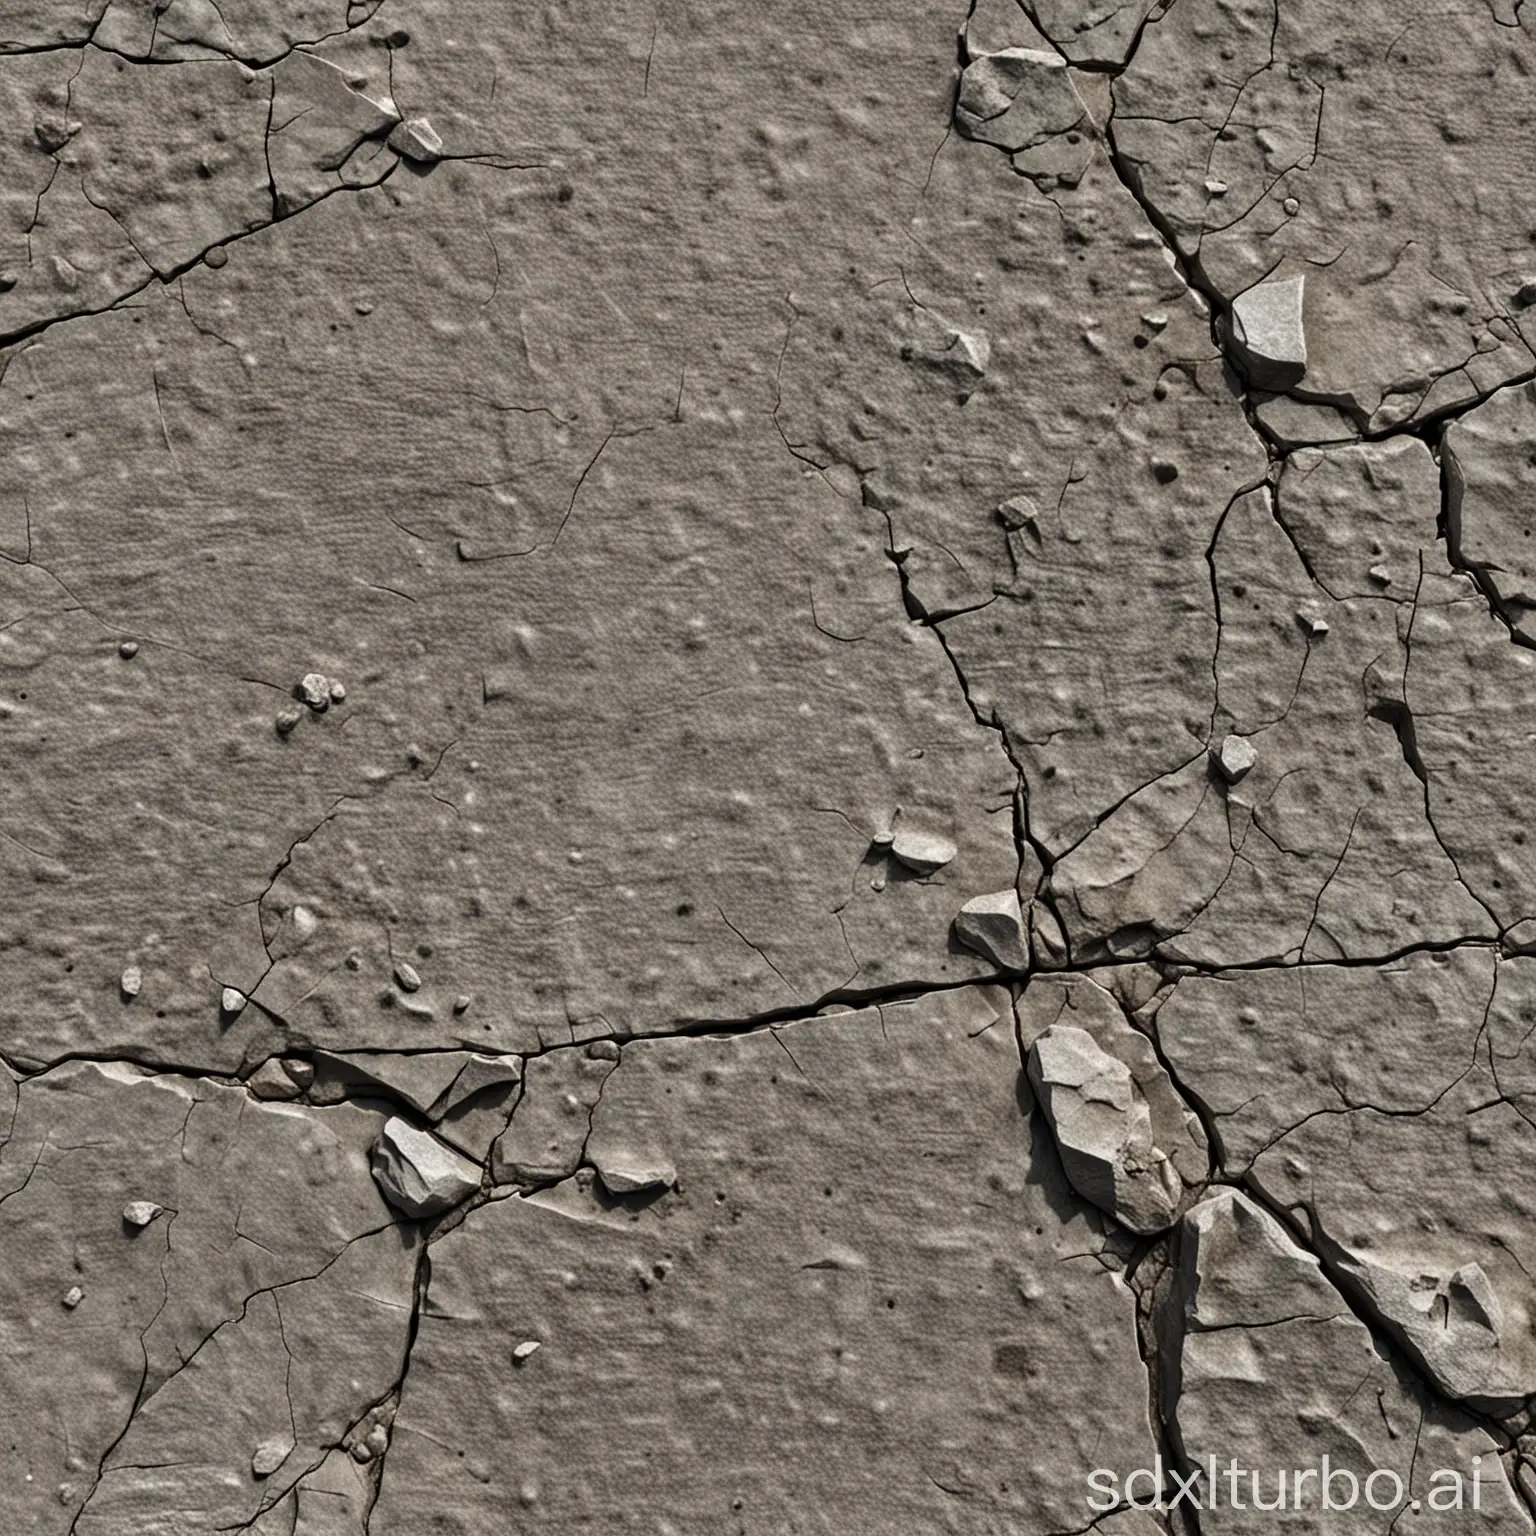 a gray cracked rocky surface asteroiden texture, high details